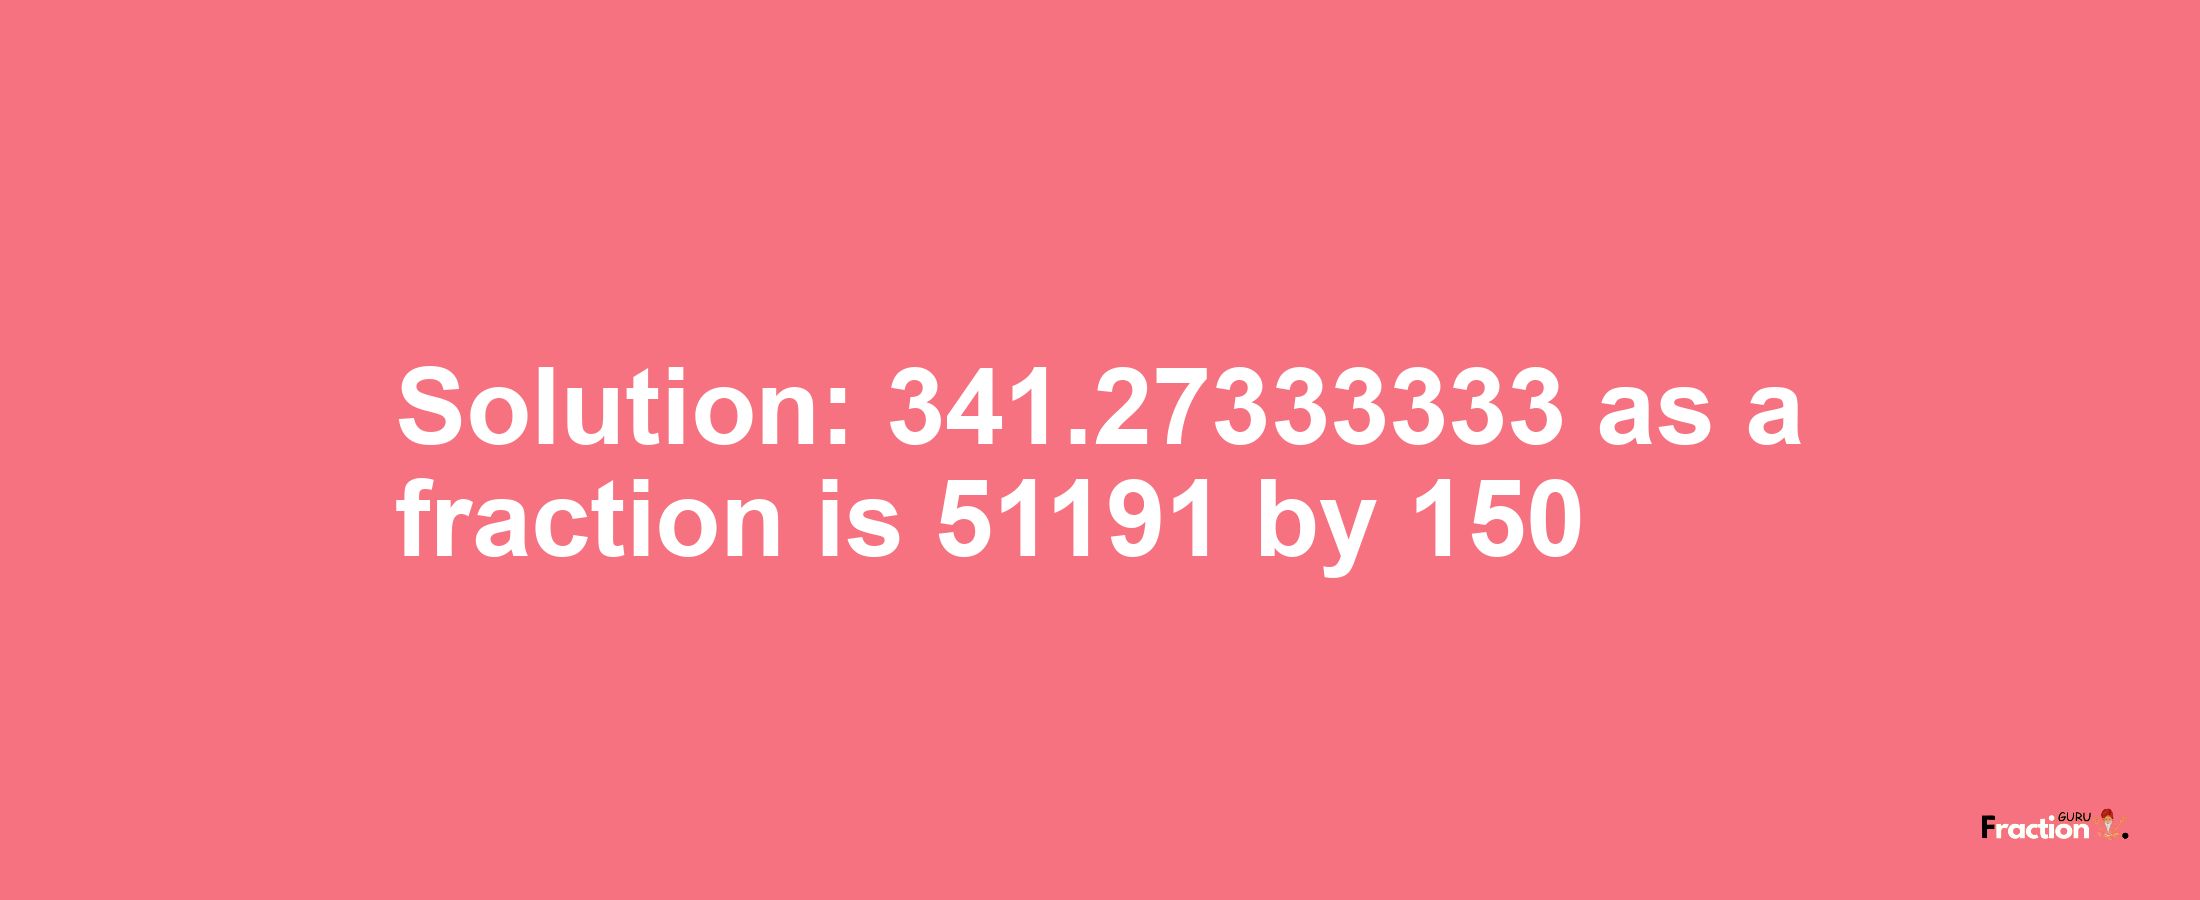 Solution:341.27333333 as a fraction is 51191/150